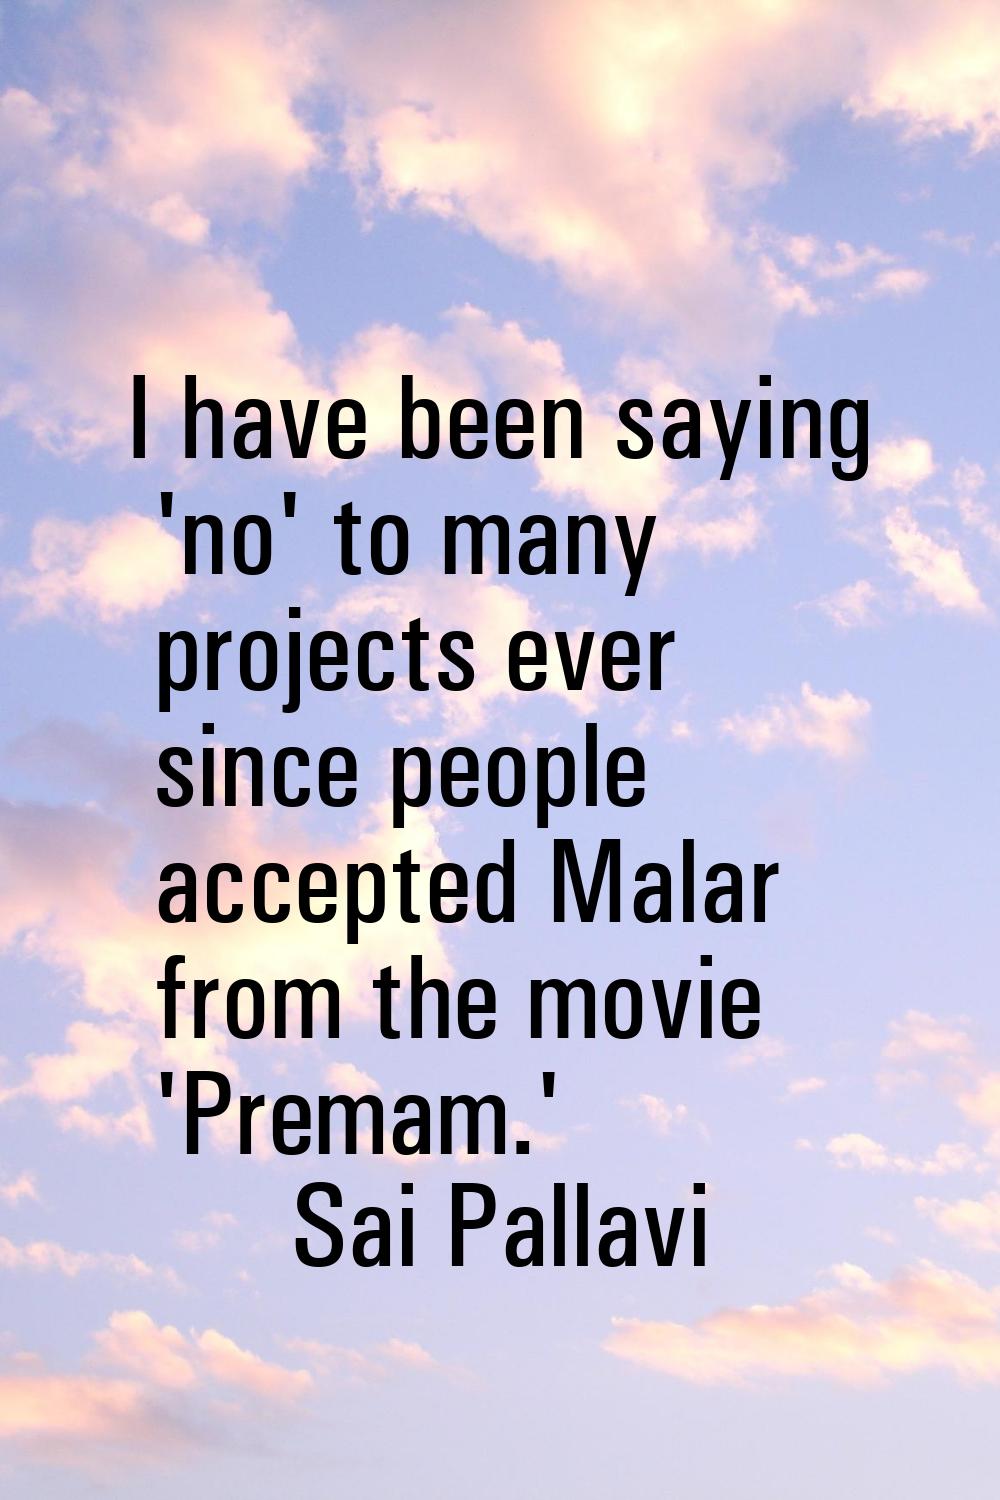 I have been saying 'no' to many projects ever since people accepted Malar from the movie 'Premam.'